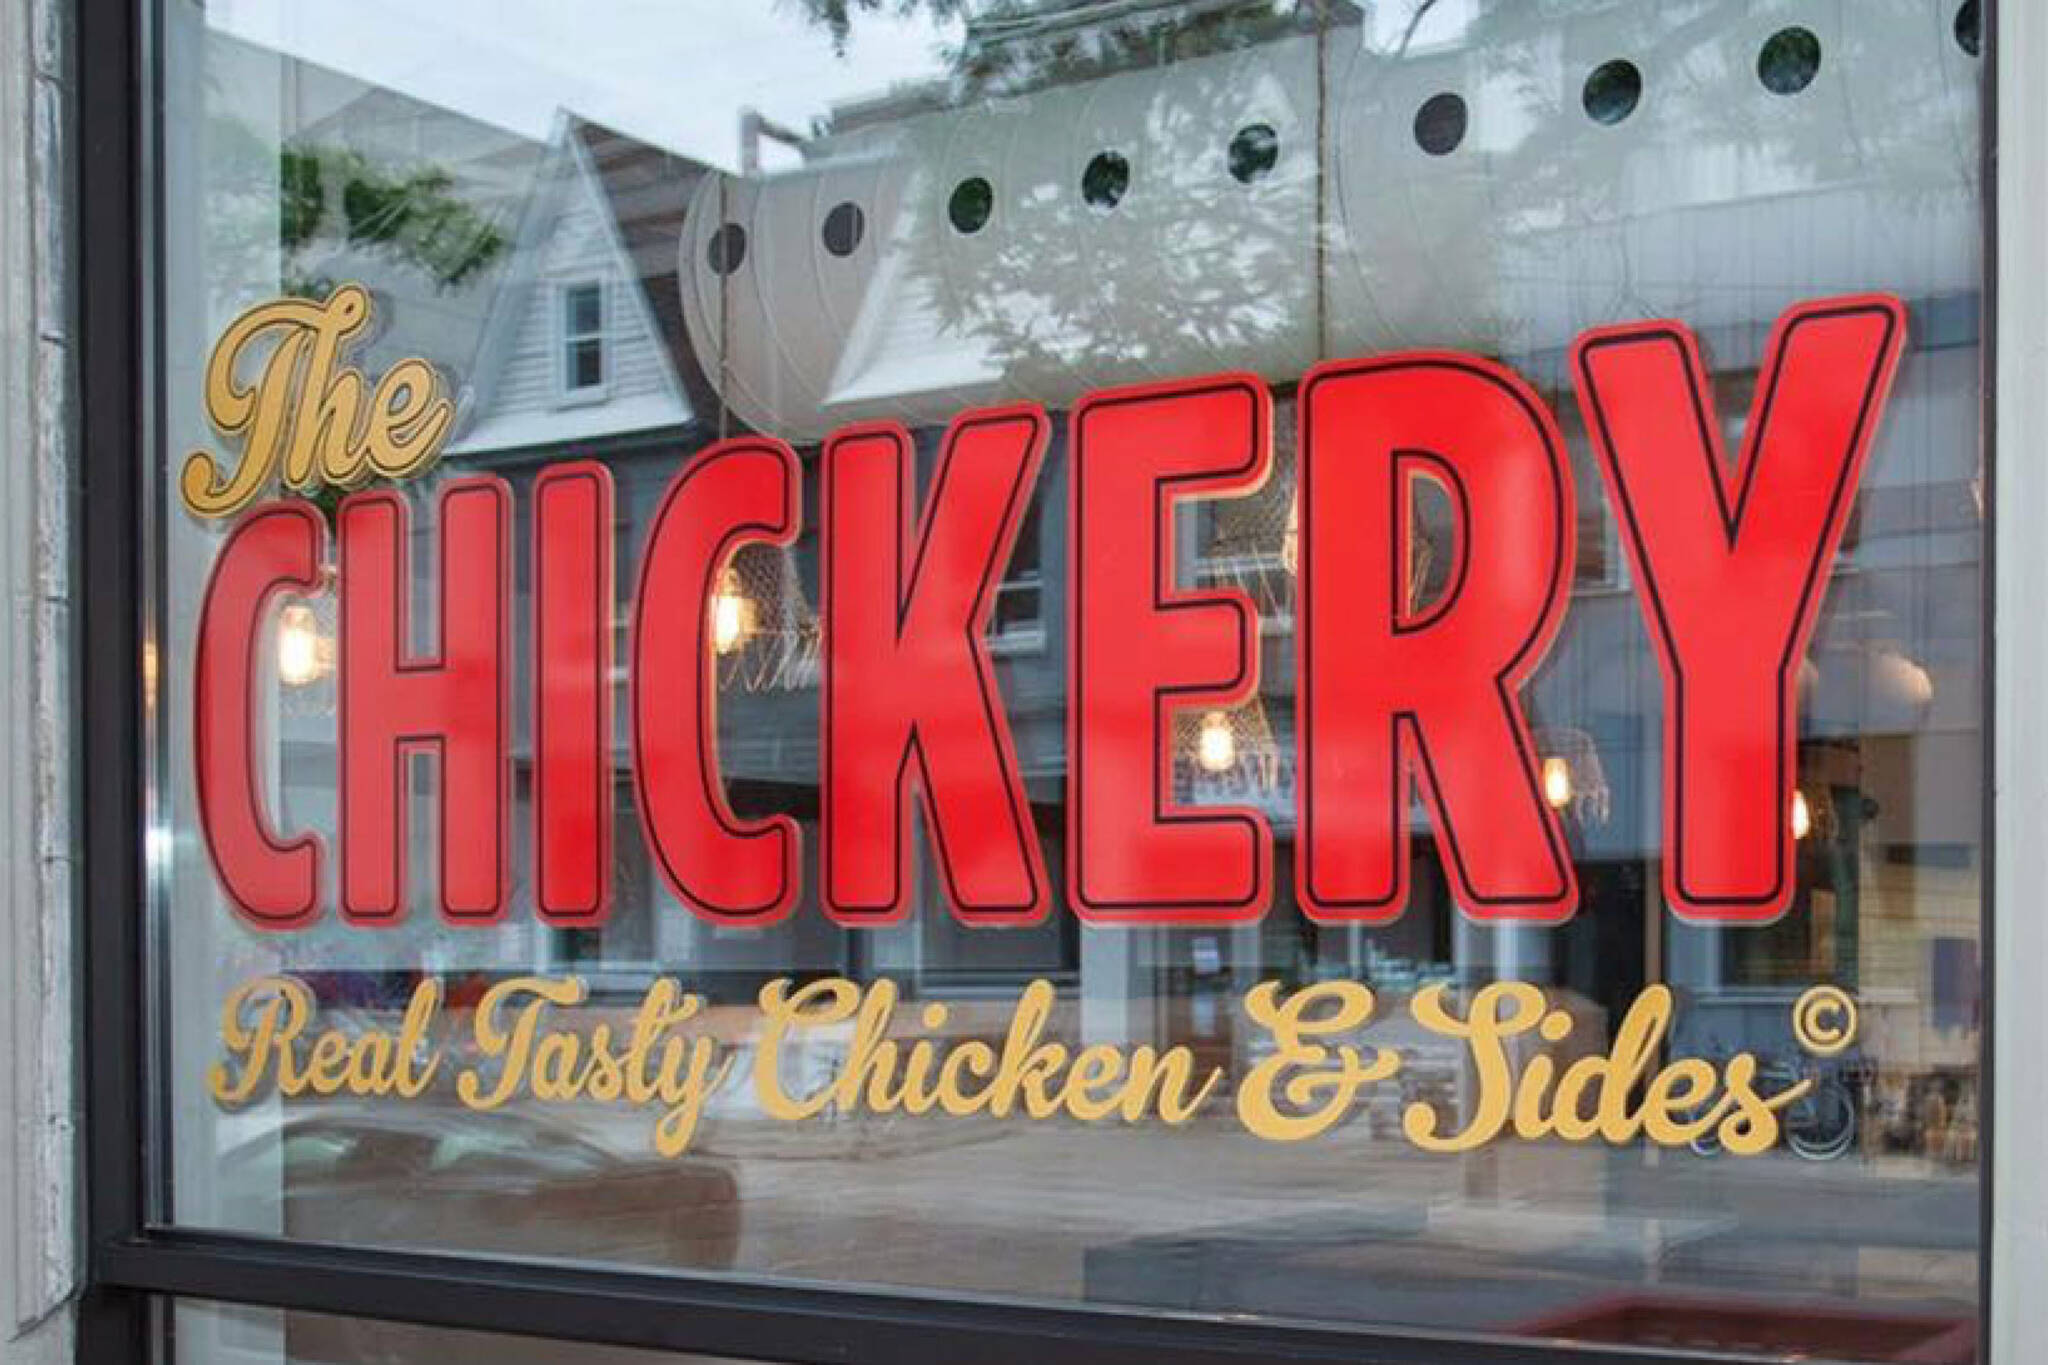 The Chickery closed